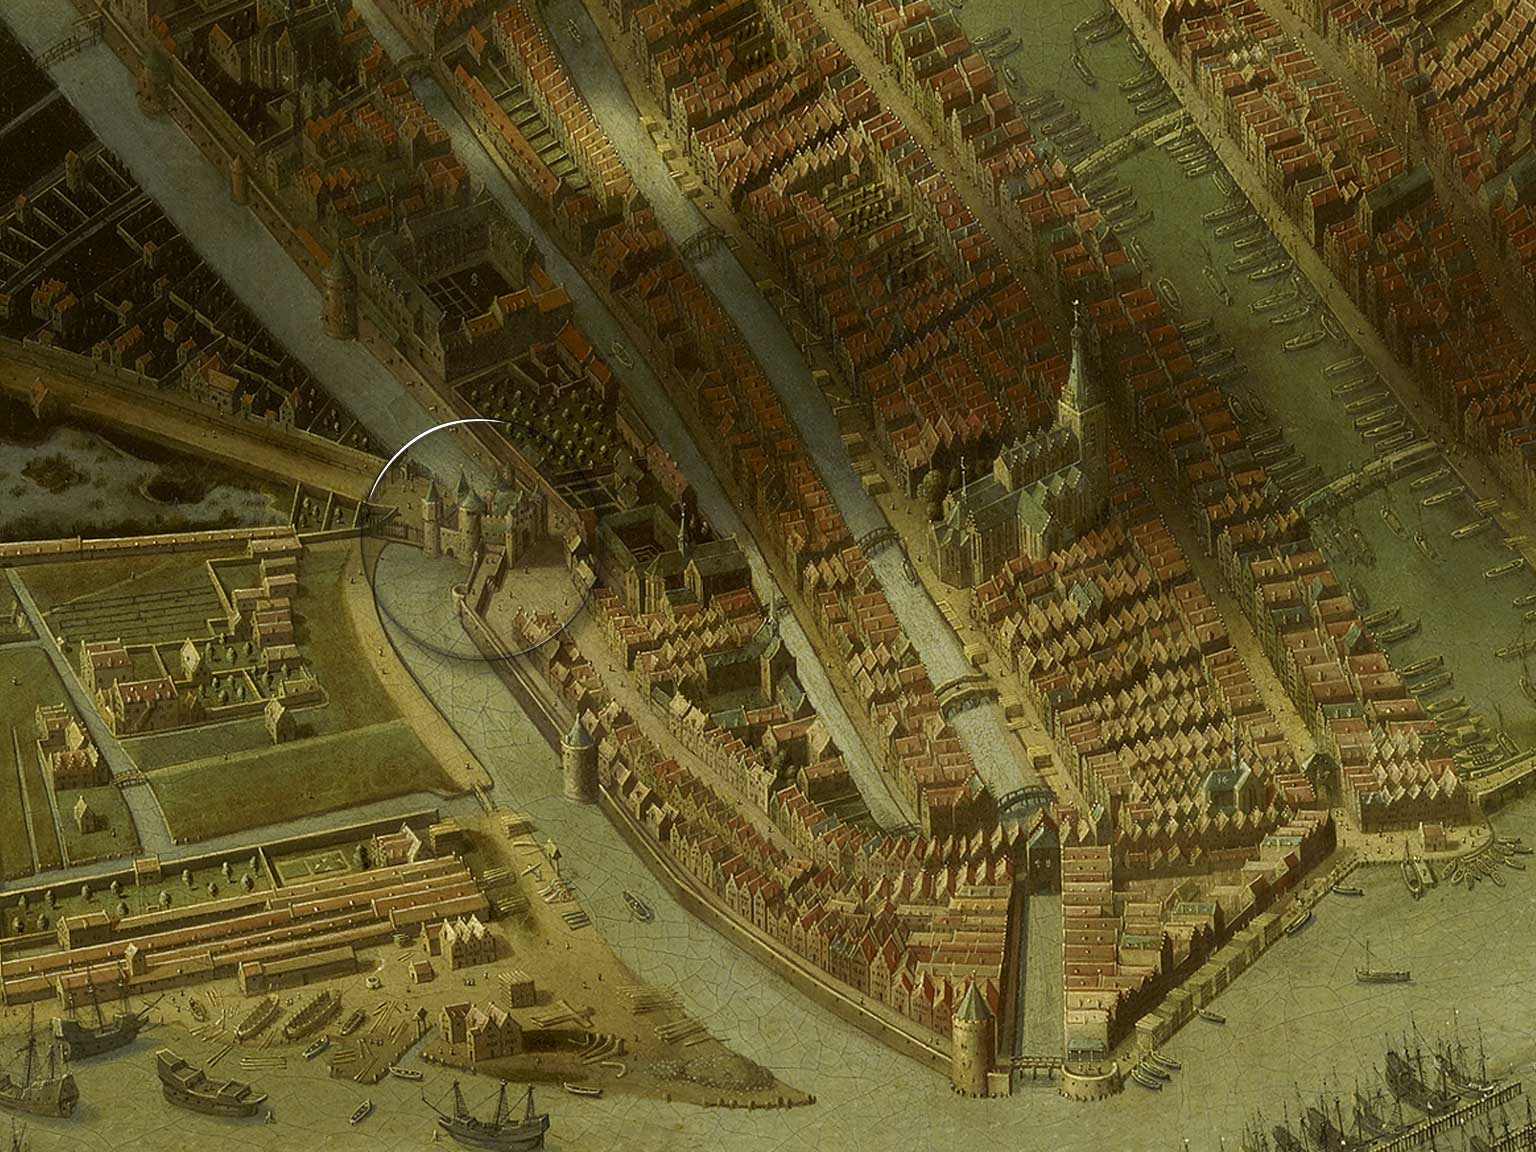 St. Anthony's Gate, Amsterdam, in 1544, detail of a painting by Jan Micker